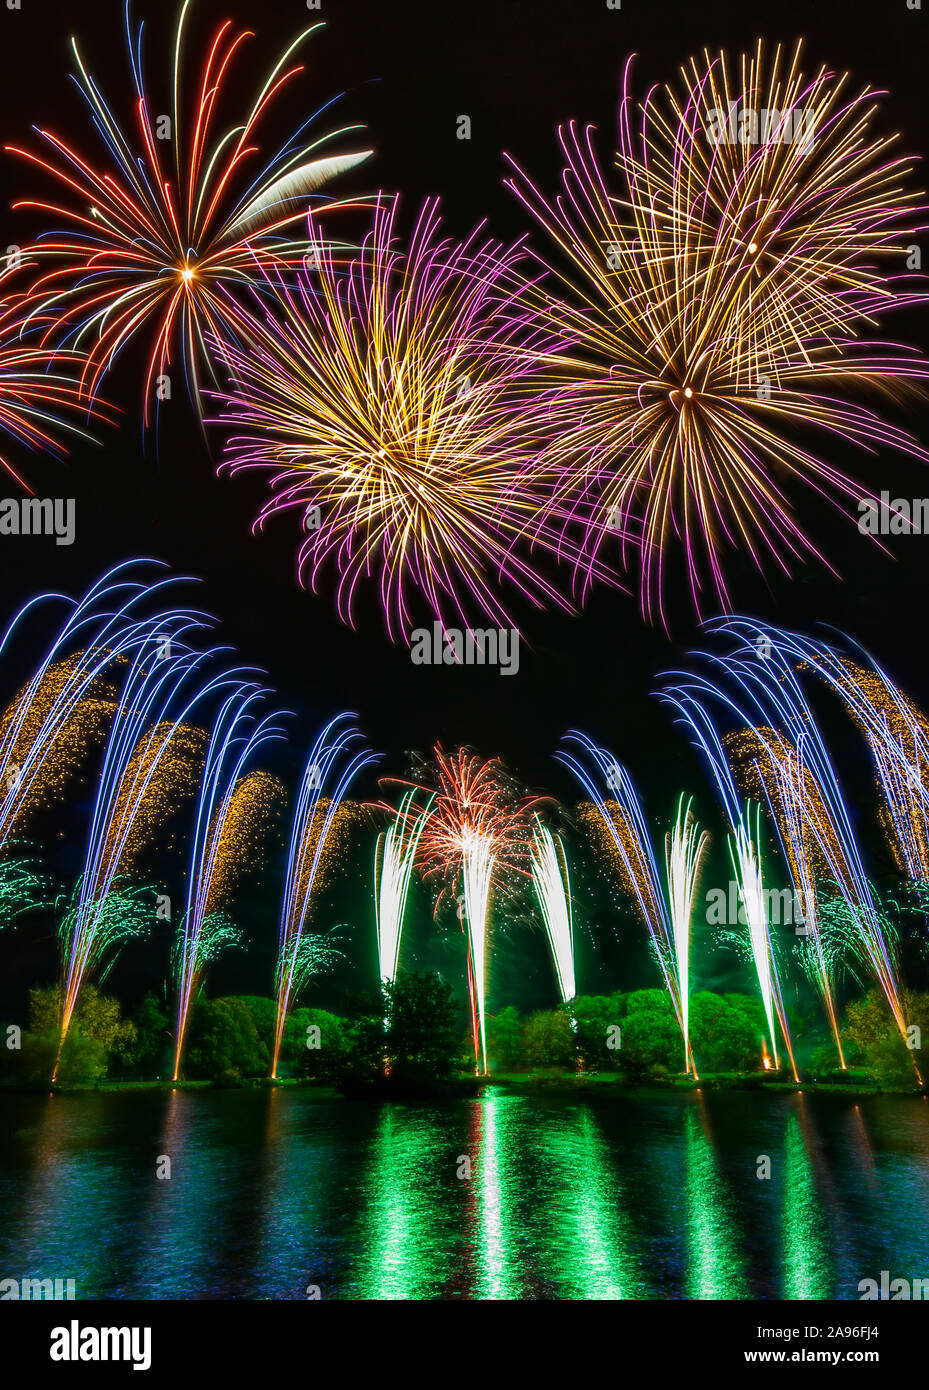 Firework display over water. Stock Photo